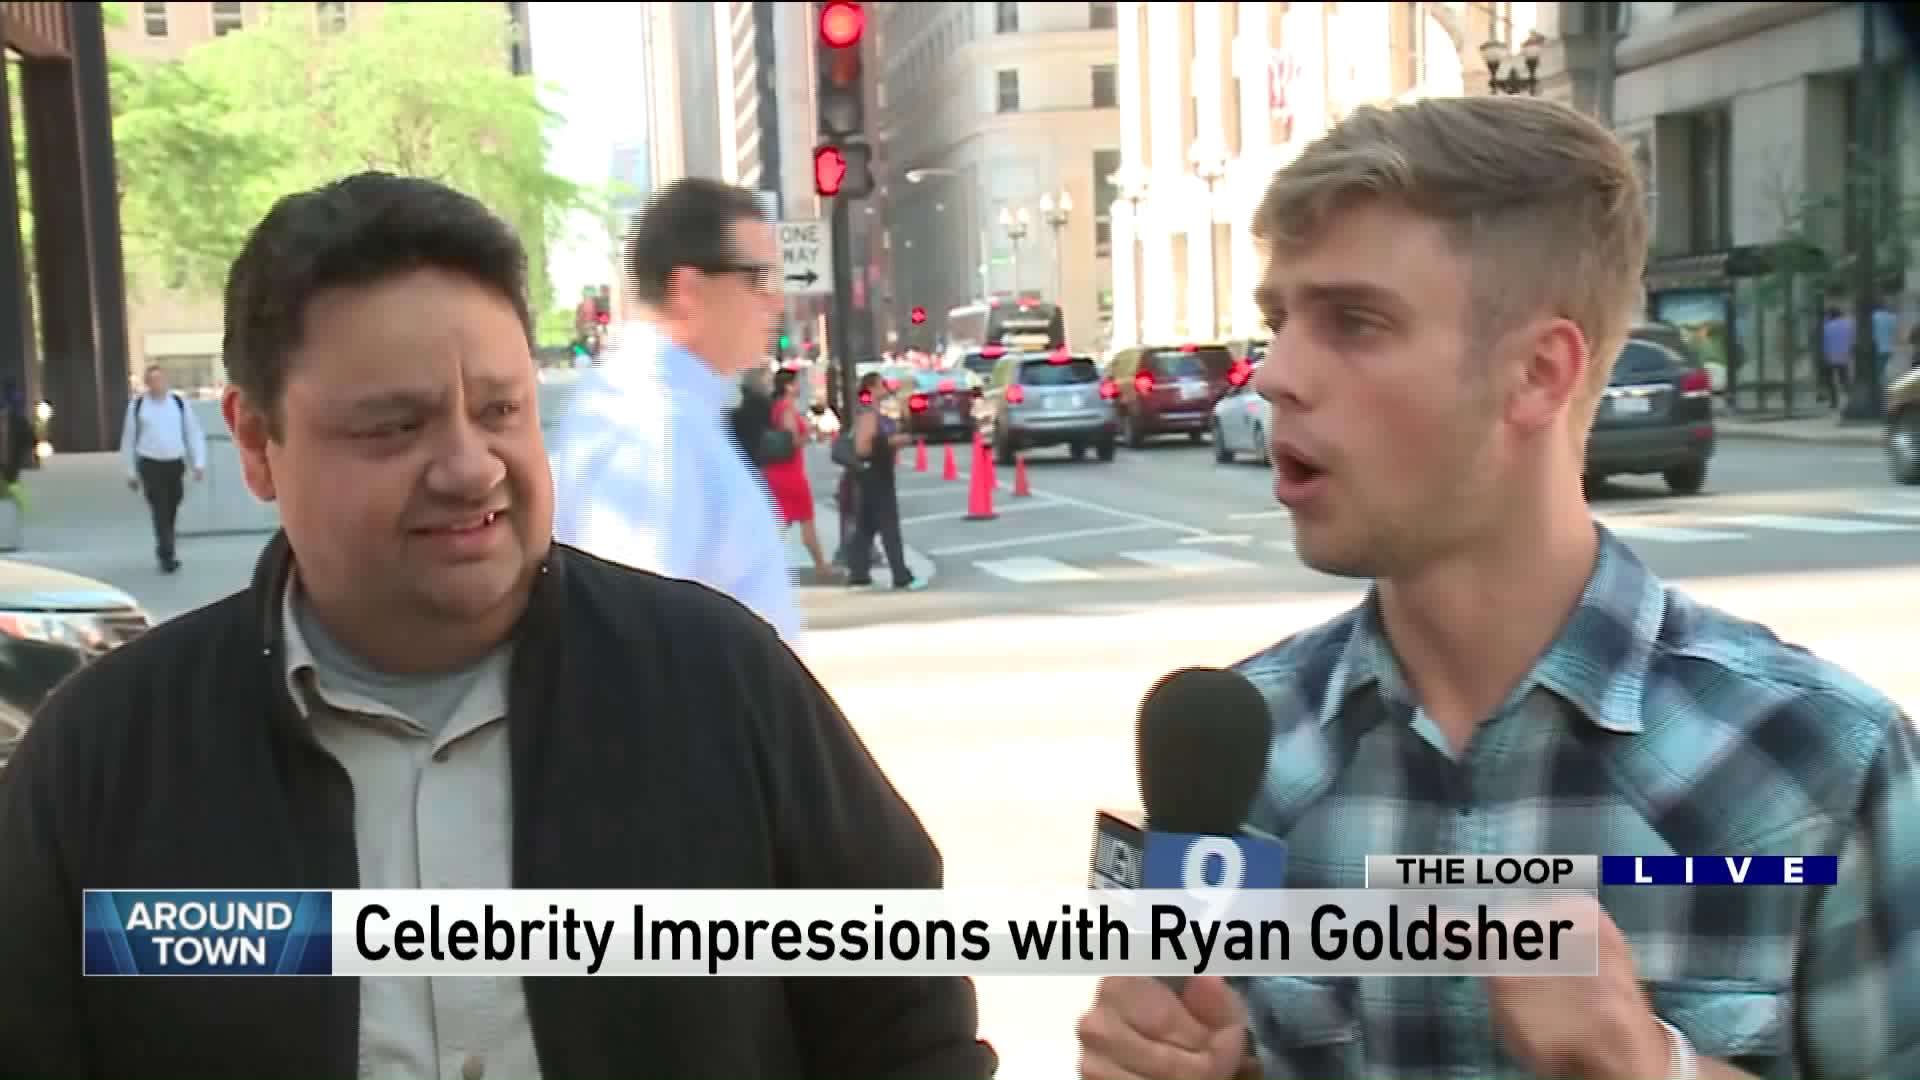 Around Town hit the streets to play “Name That Celebrity” with impressionist Ryan Goldsher